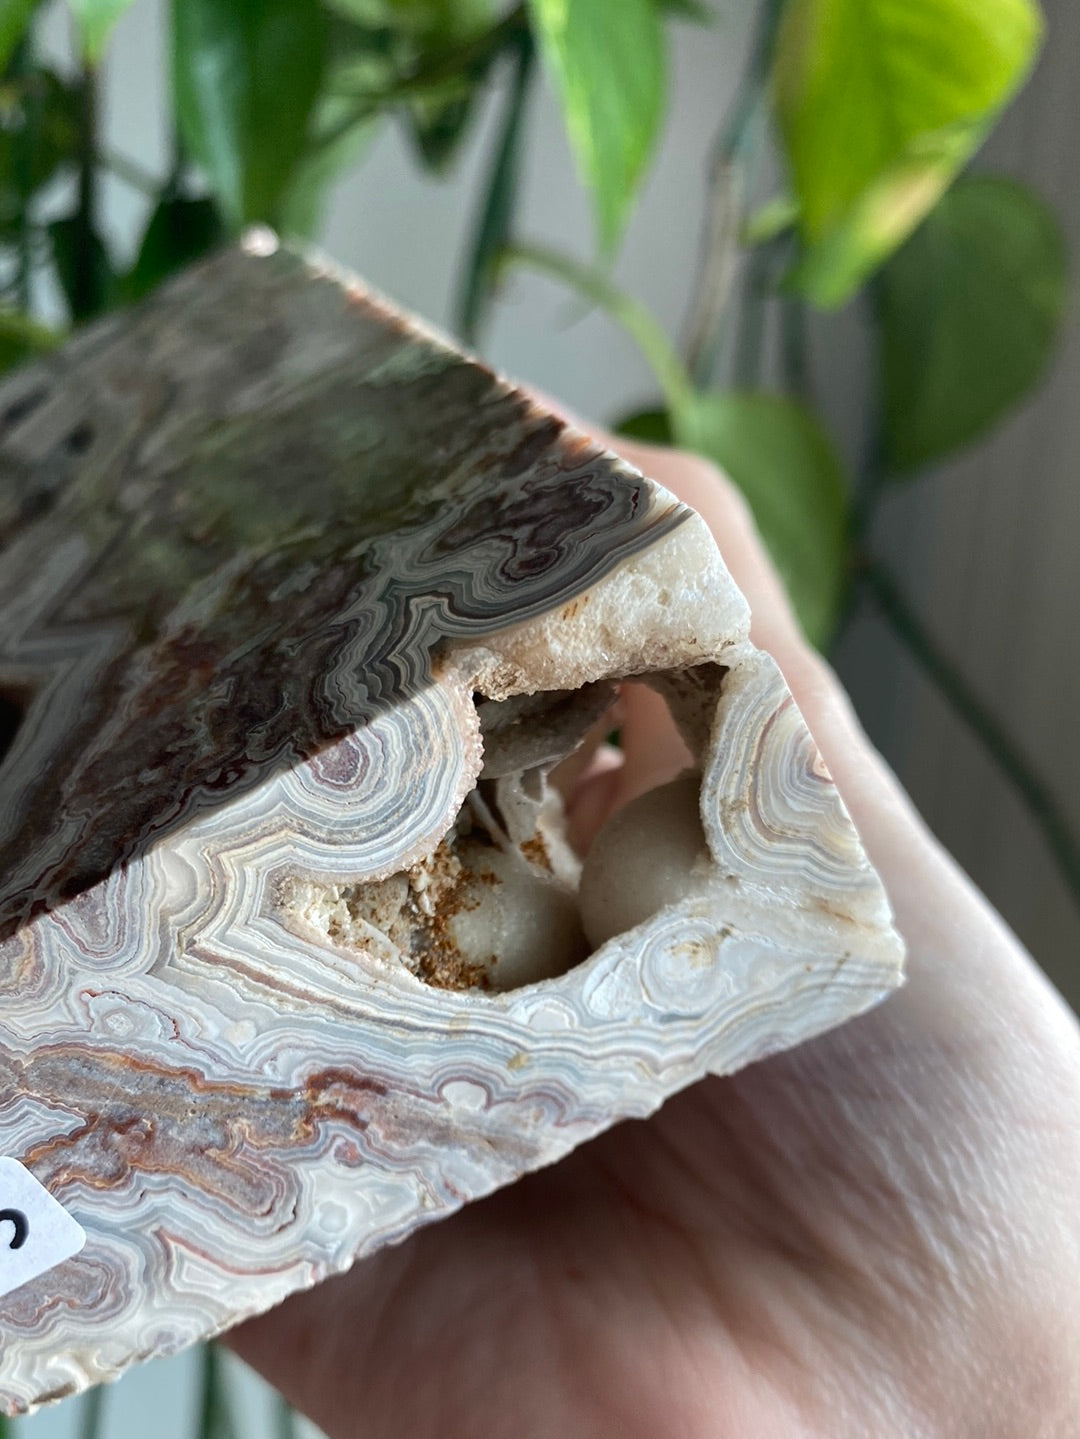 XL Mexican Crazy Lace Agate Tower With Druzy